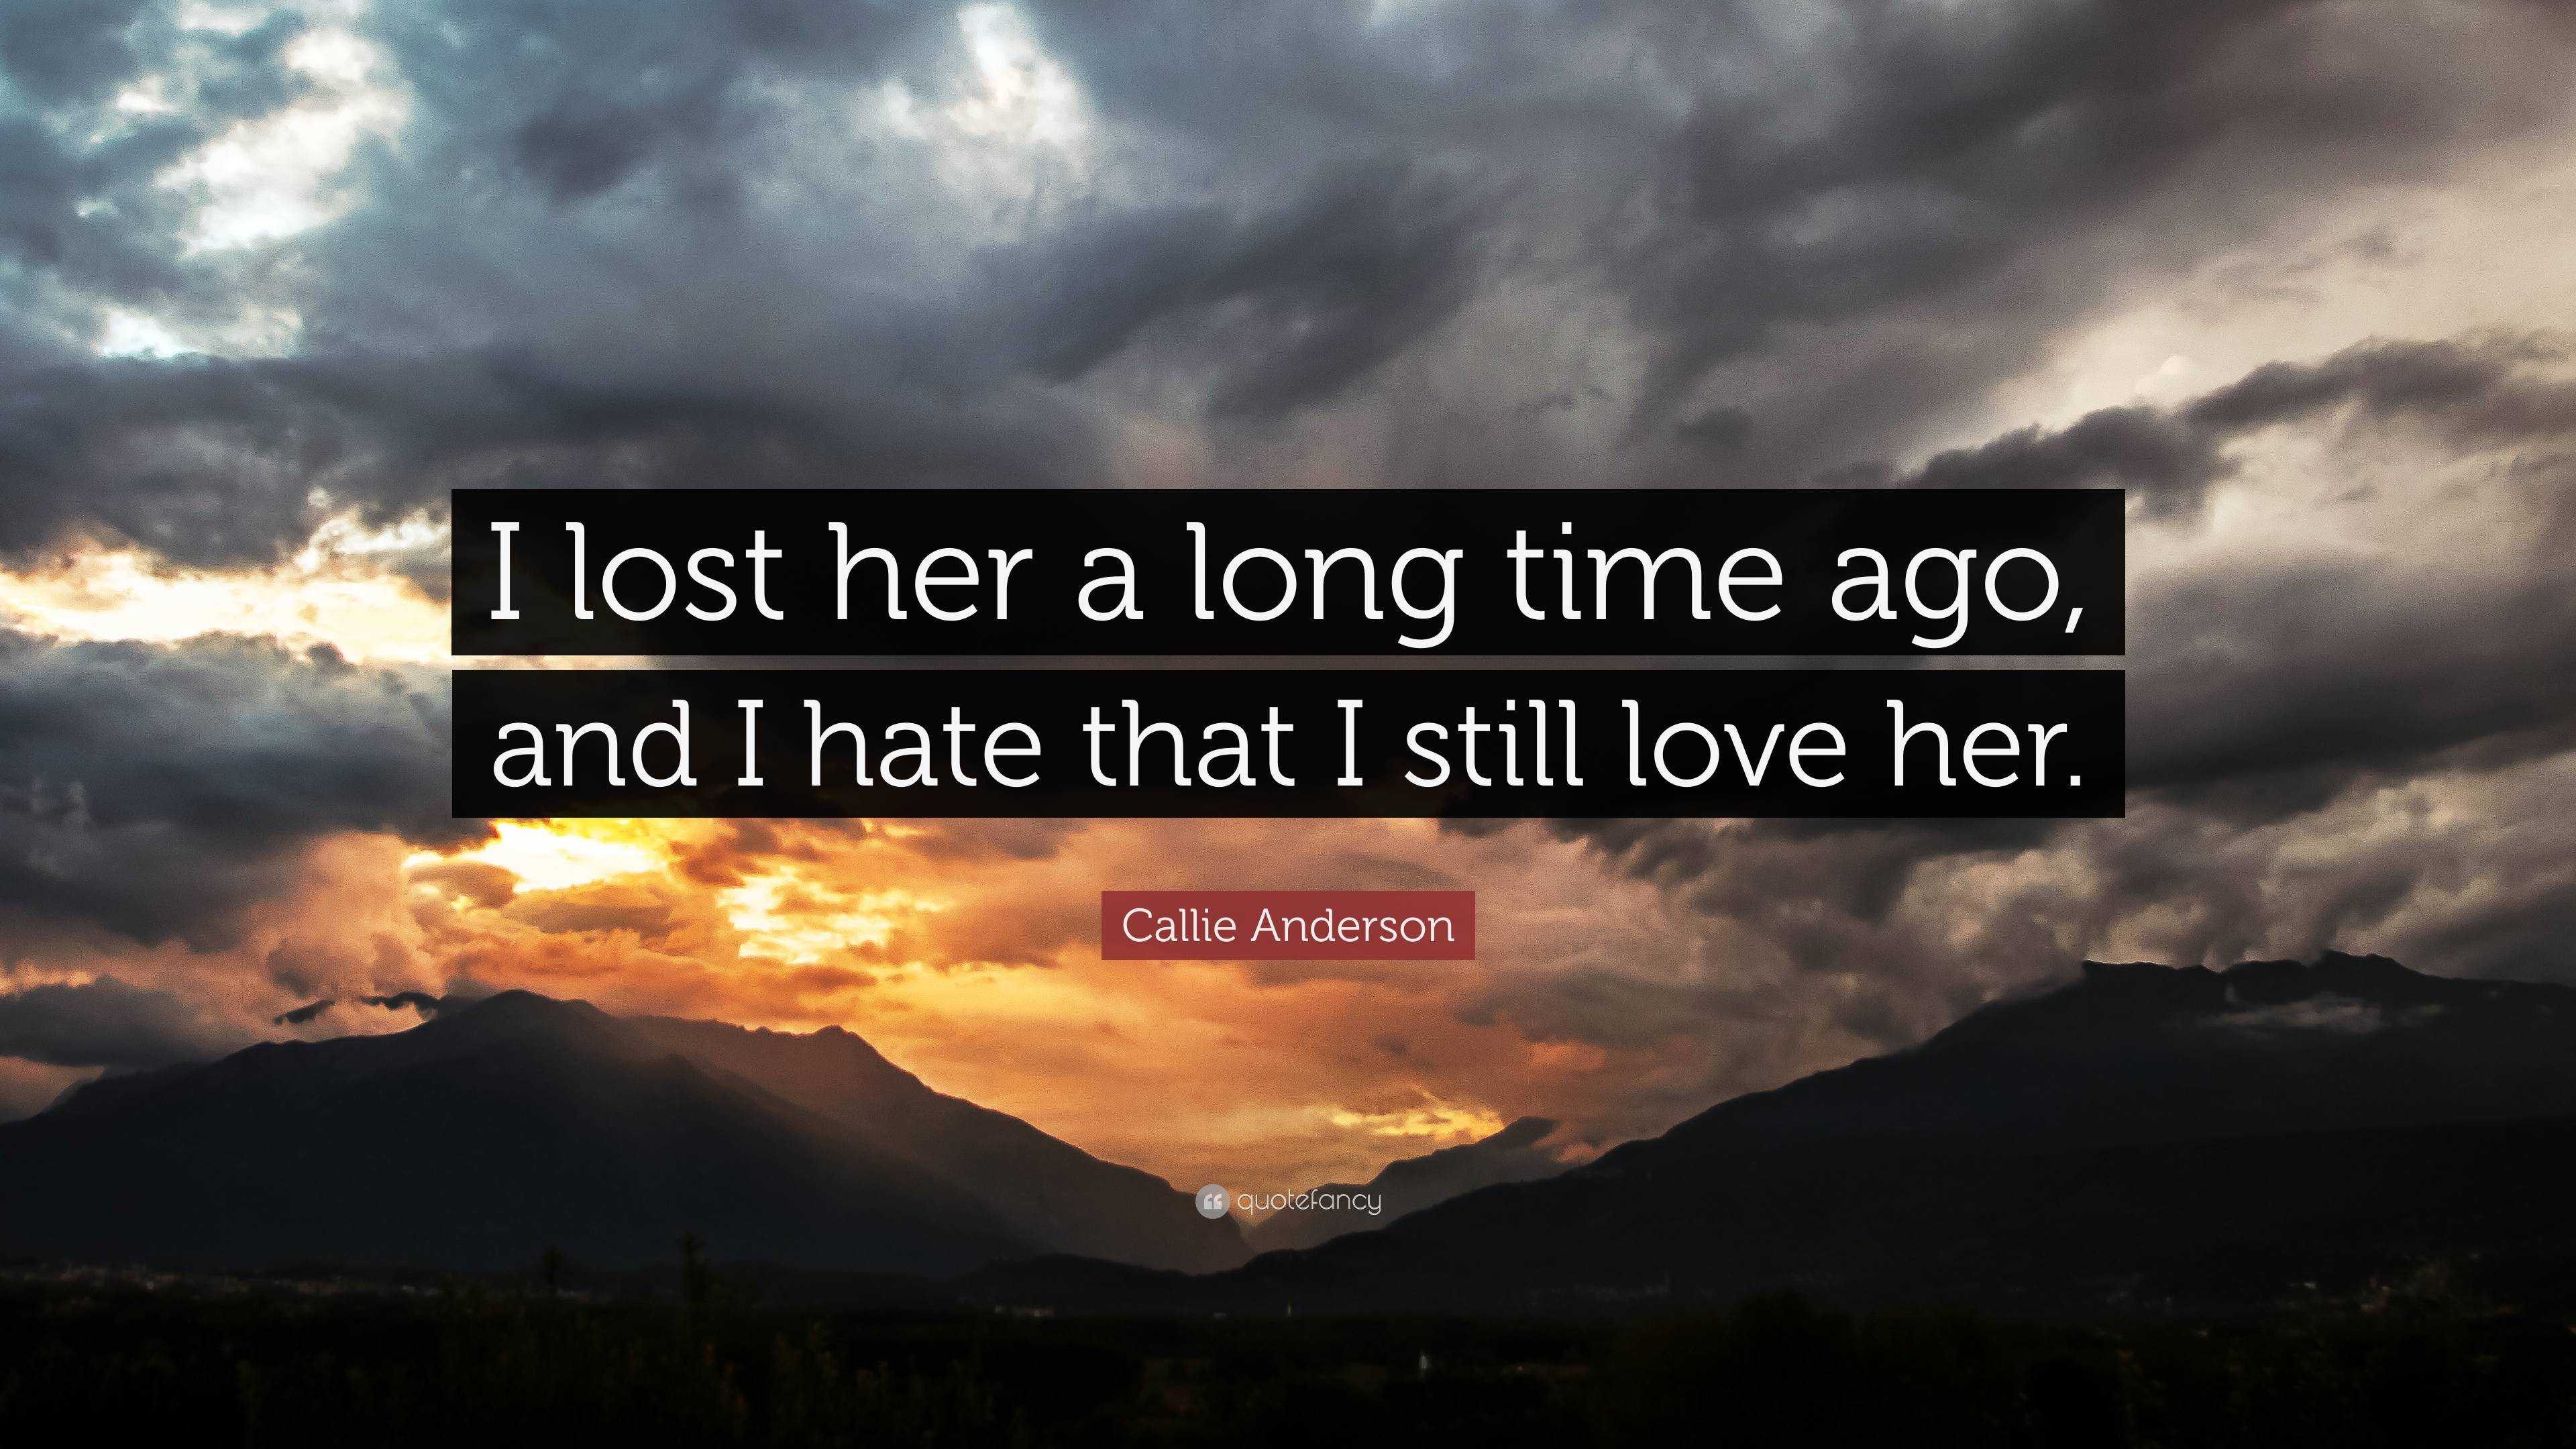 Callie Anderson Quote: “You only get one true love. That was what